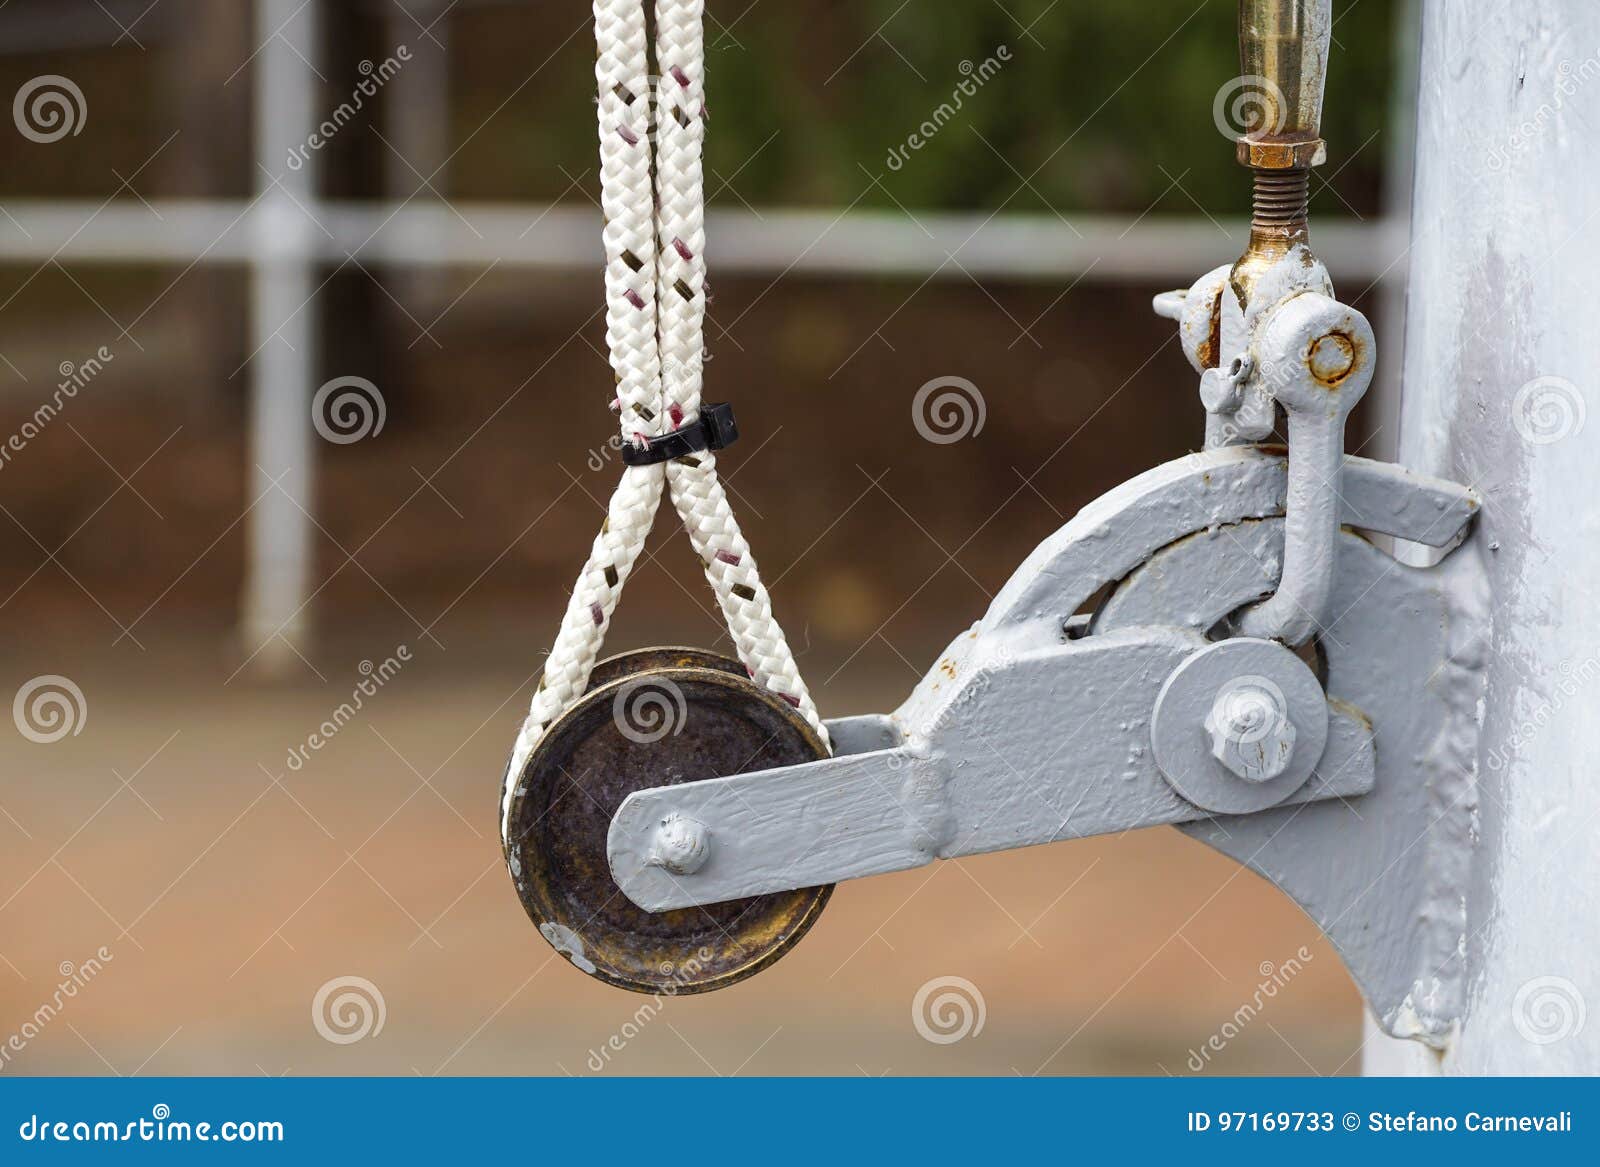 The Pulley for Pulling the Flag on the Pole Stock Image - Image of lawn,  equipment: 97169733